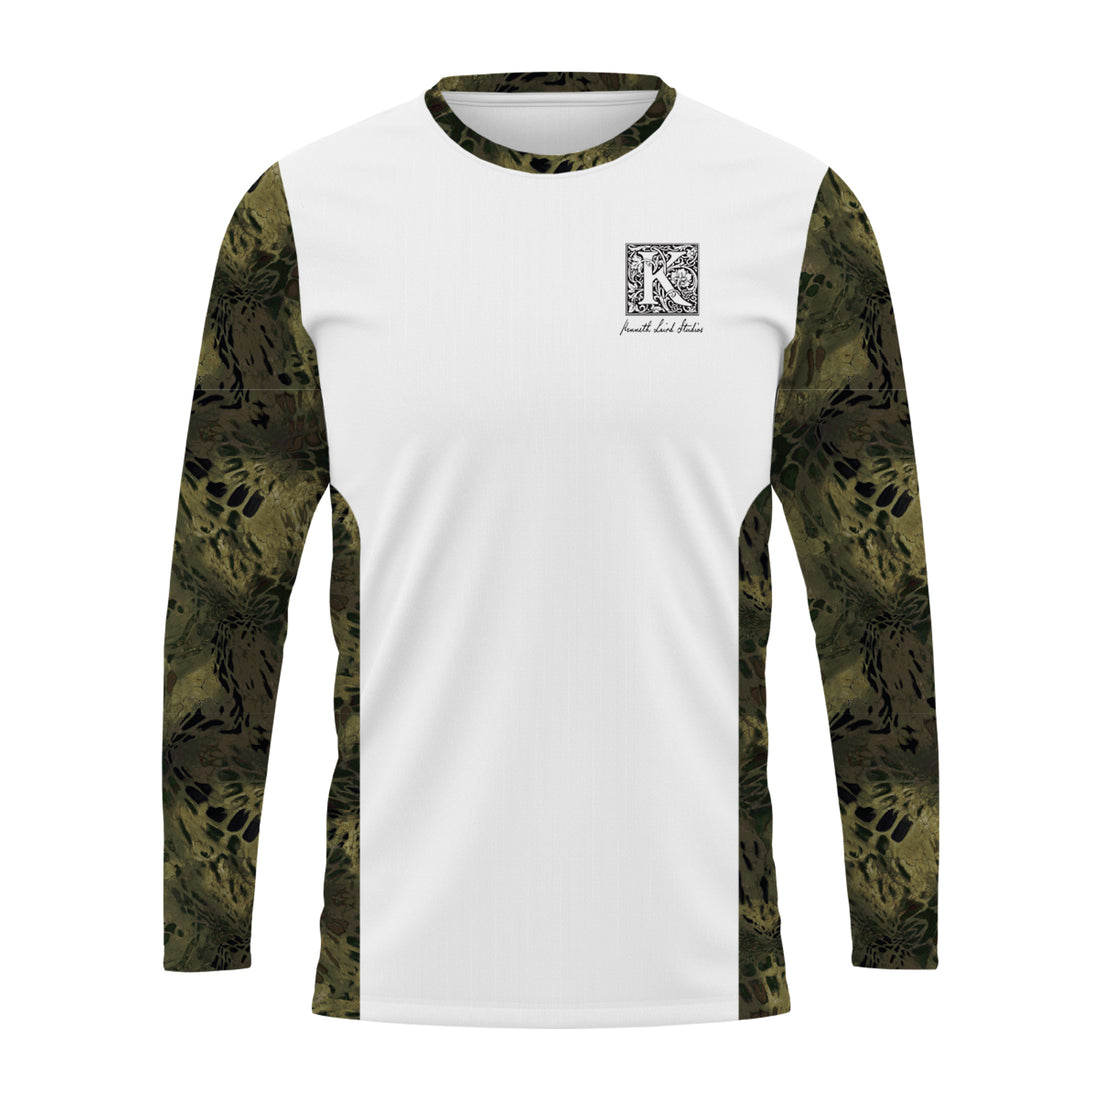 Men's Performance "The Youngster" PRYM1 Camo Woodlands Long Sleeve